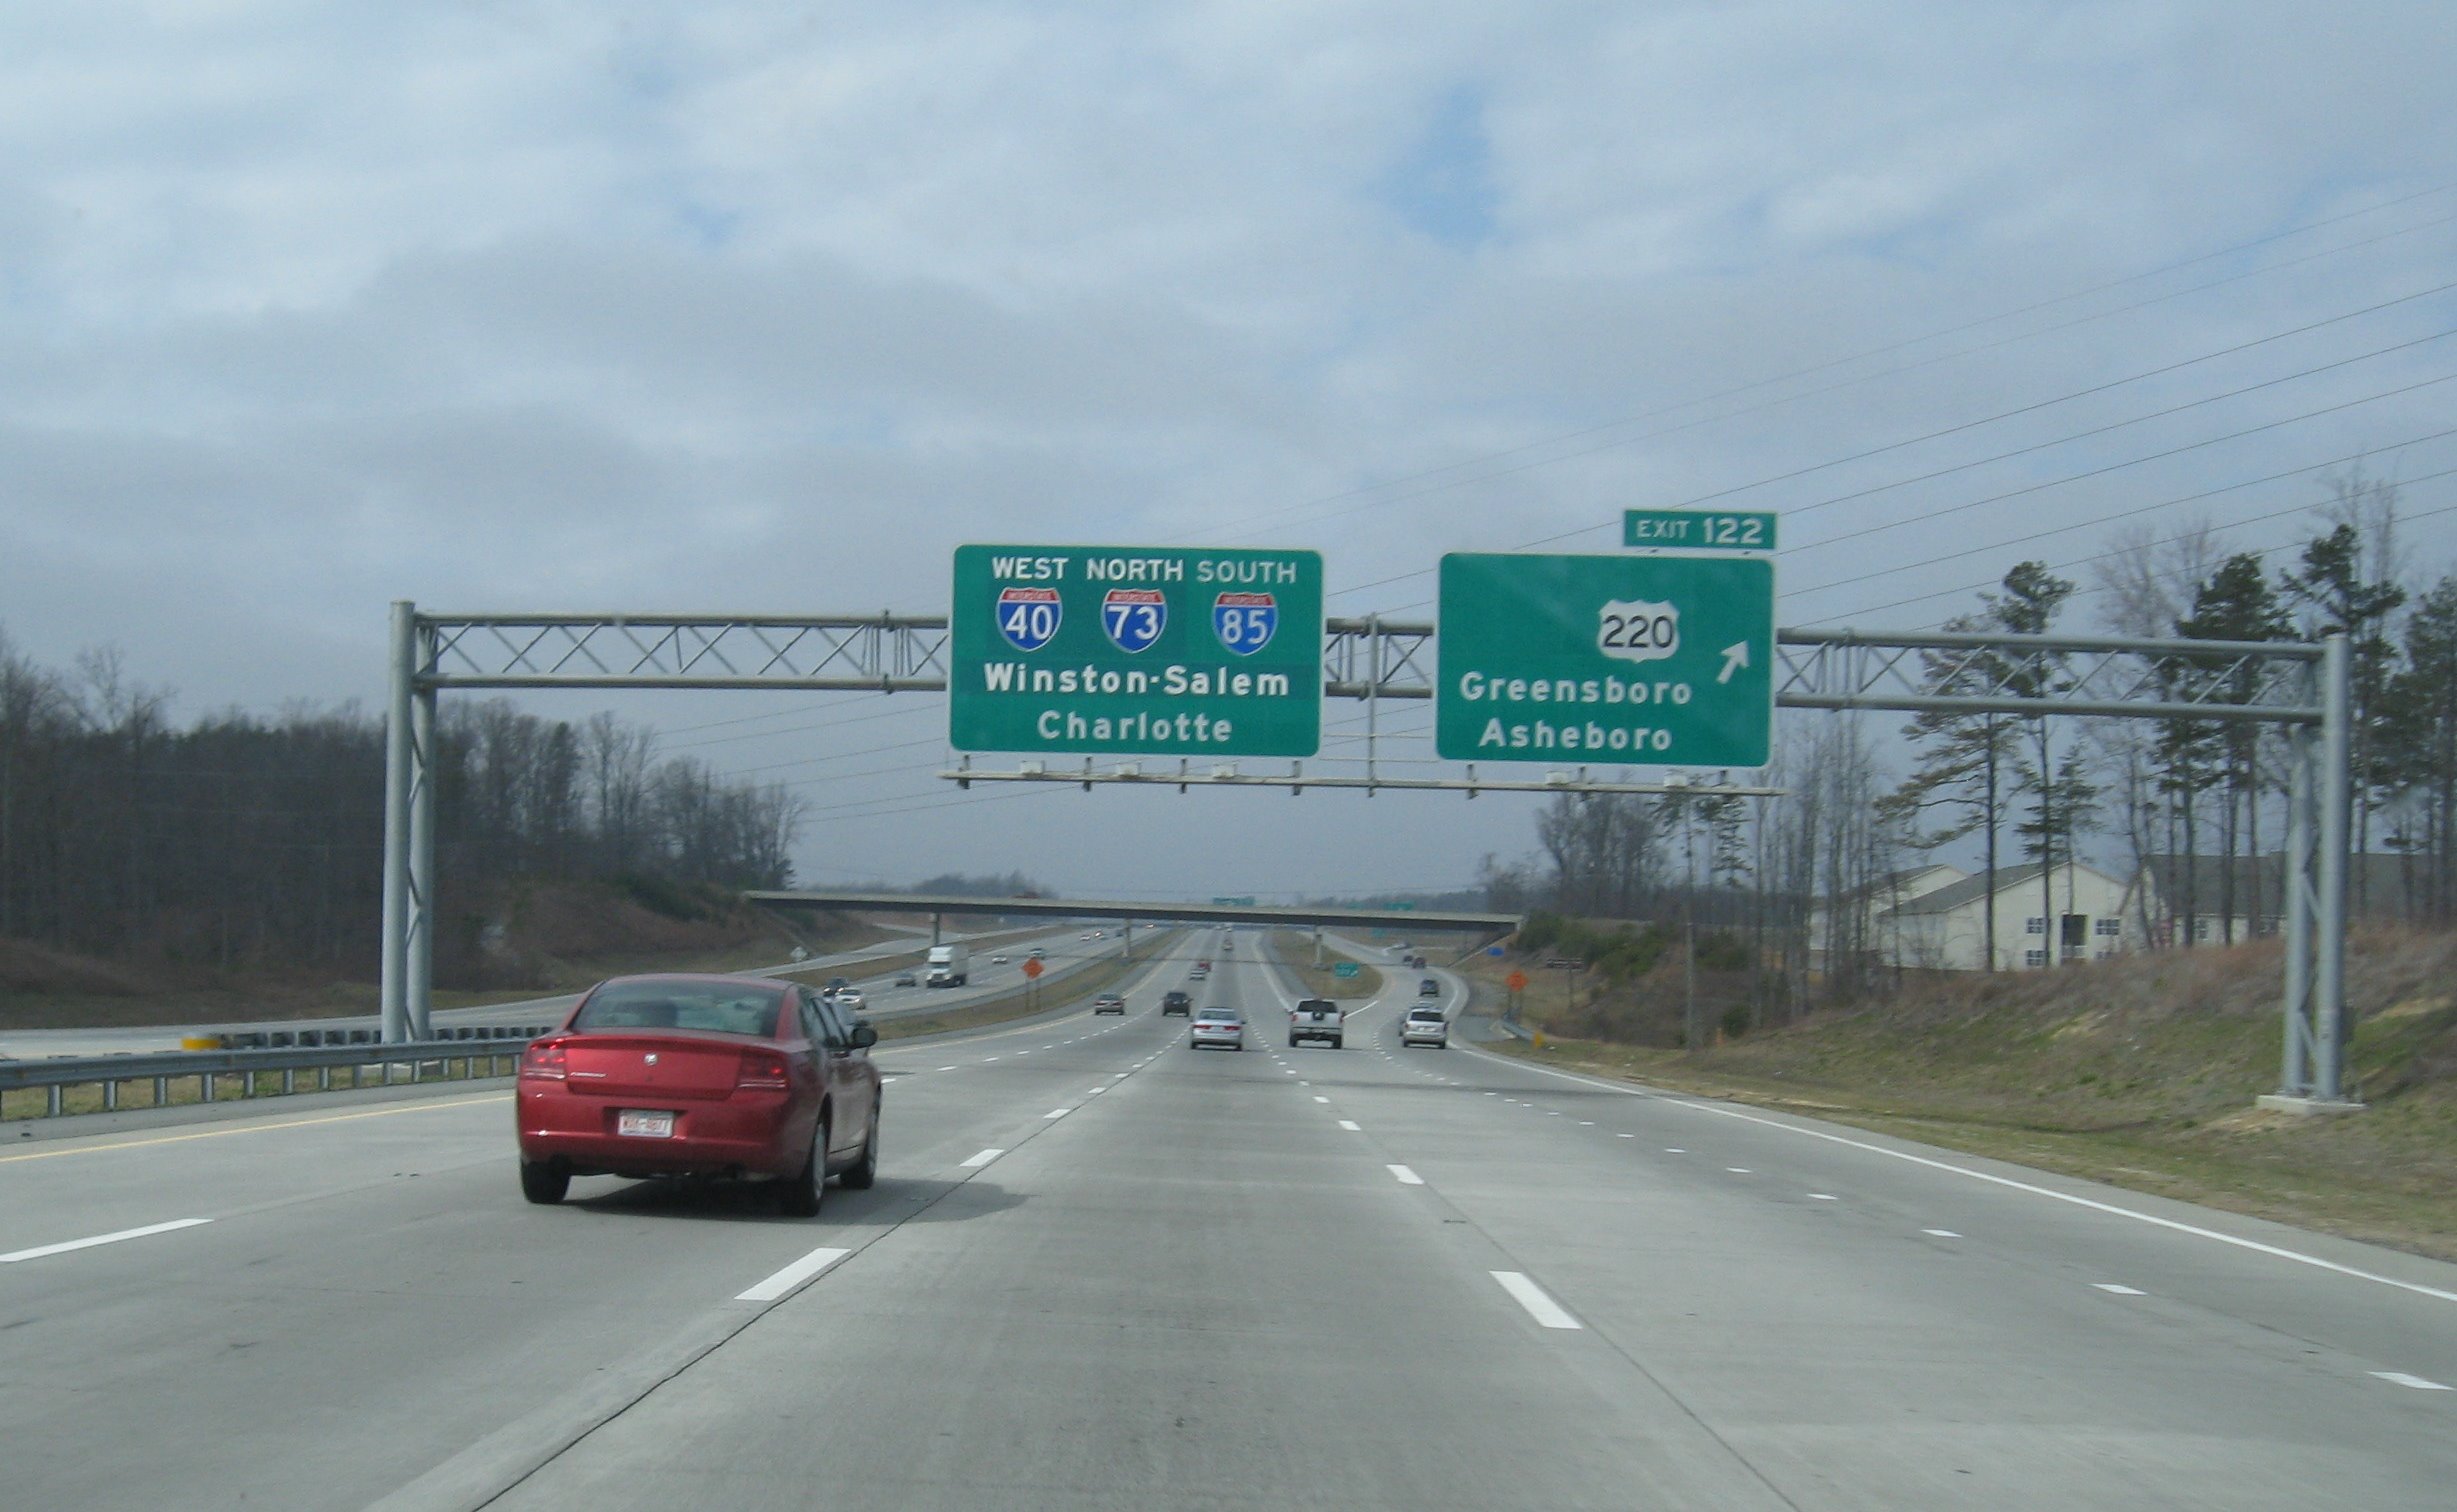 Photo of the three interstate route sign on I-85 South shortly after I-73
segment of Greensboro Loop opened in Feb. 2008